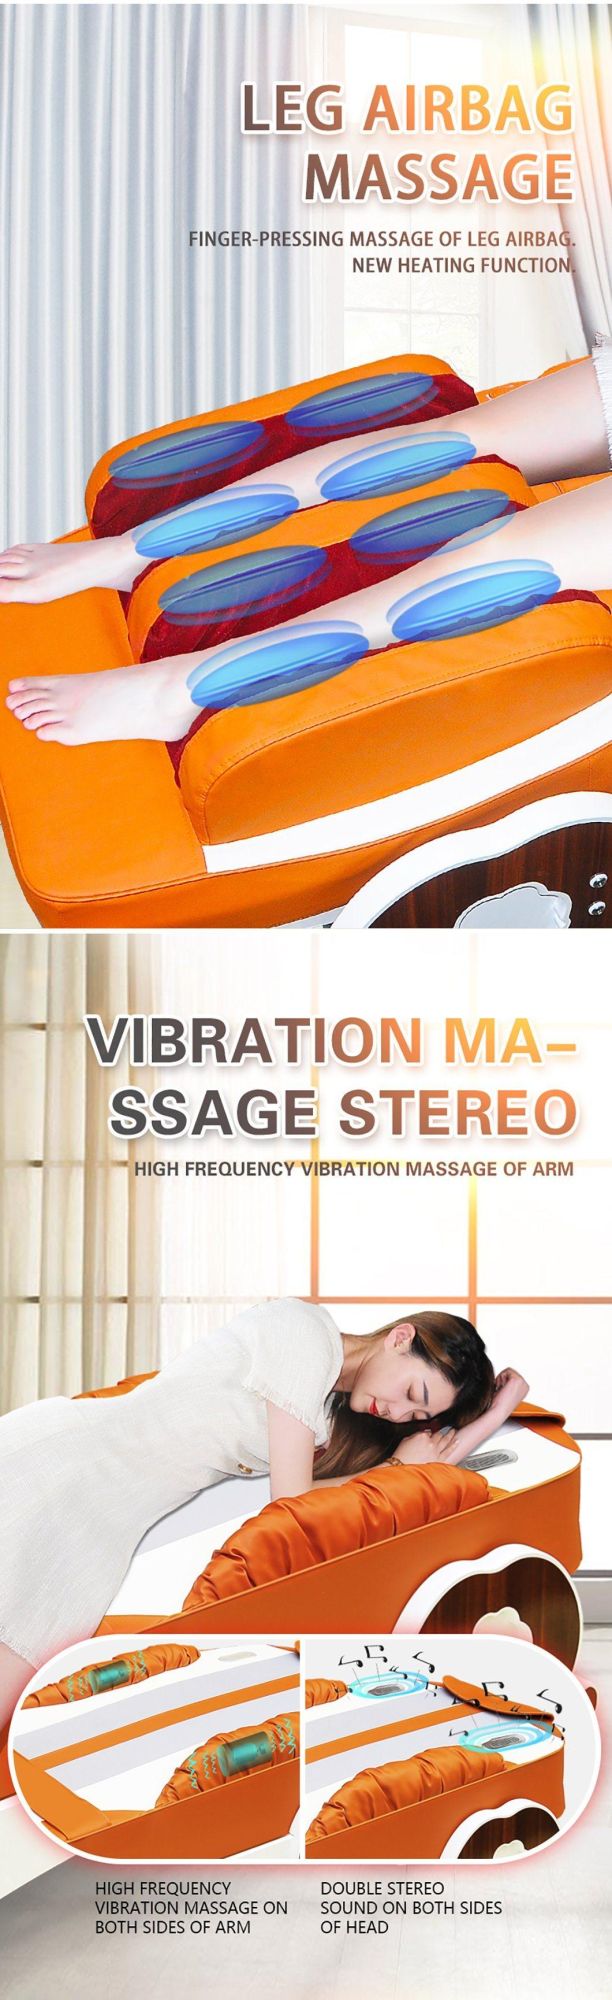 Korea Thermal Jade Massage Bed Health Care Infrared Heating Therapeutic Electric Jade Stone Roller Rolling Massage Bed